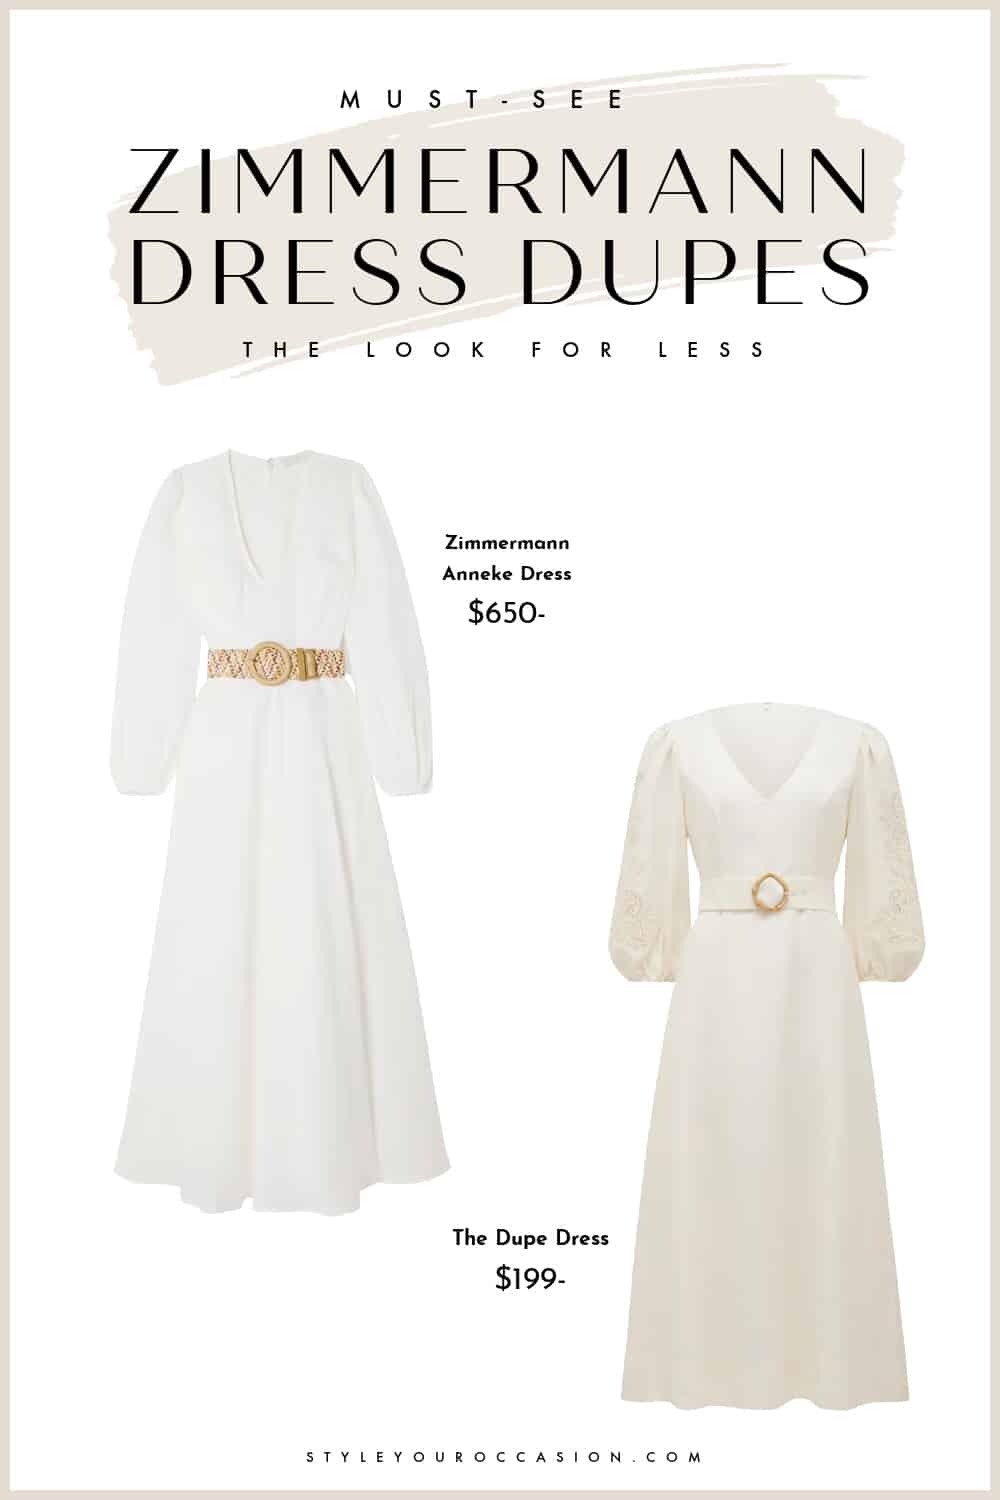 Image of a white belted Zimmermann dress alongside a similar looking dress dupe